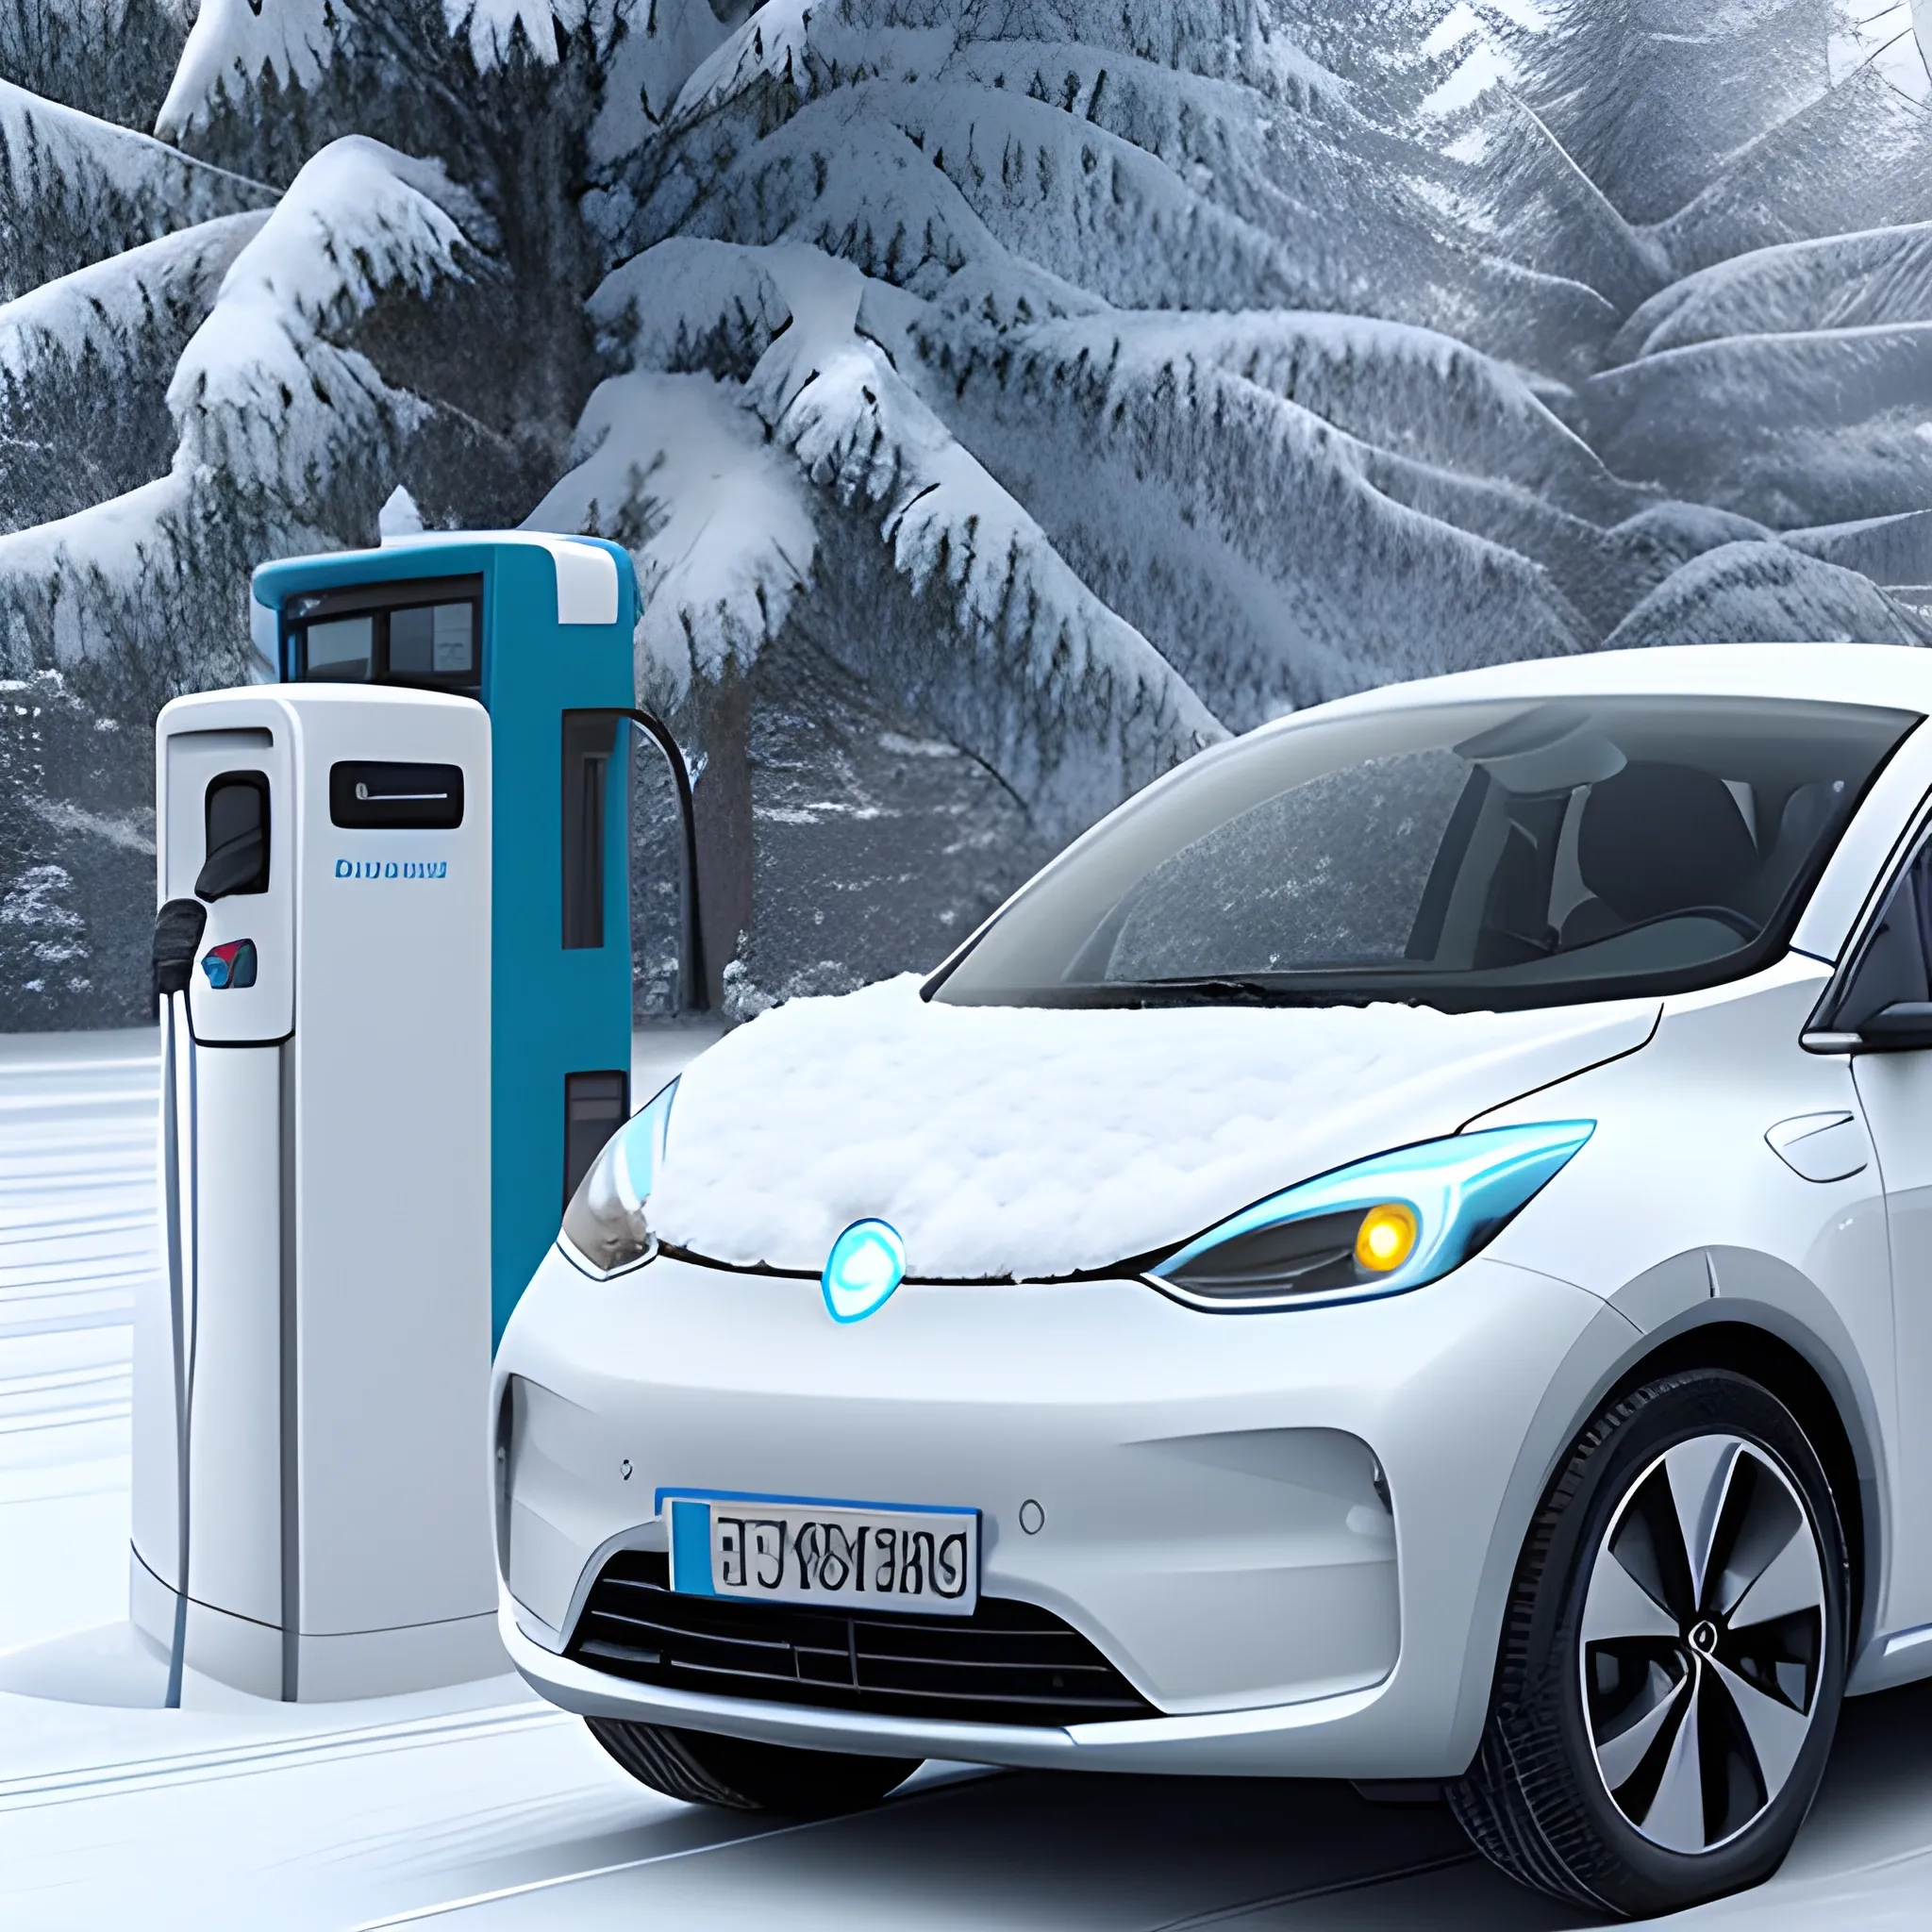 An electric car is being charged while in use, with realistic snow, ultra realistic, and high-definition photography